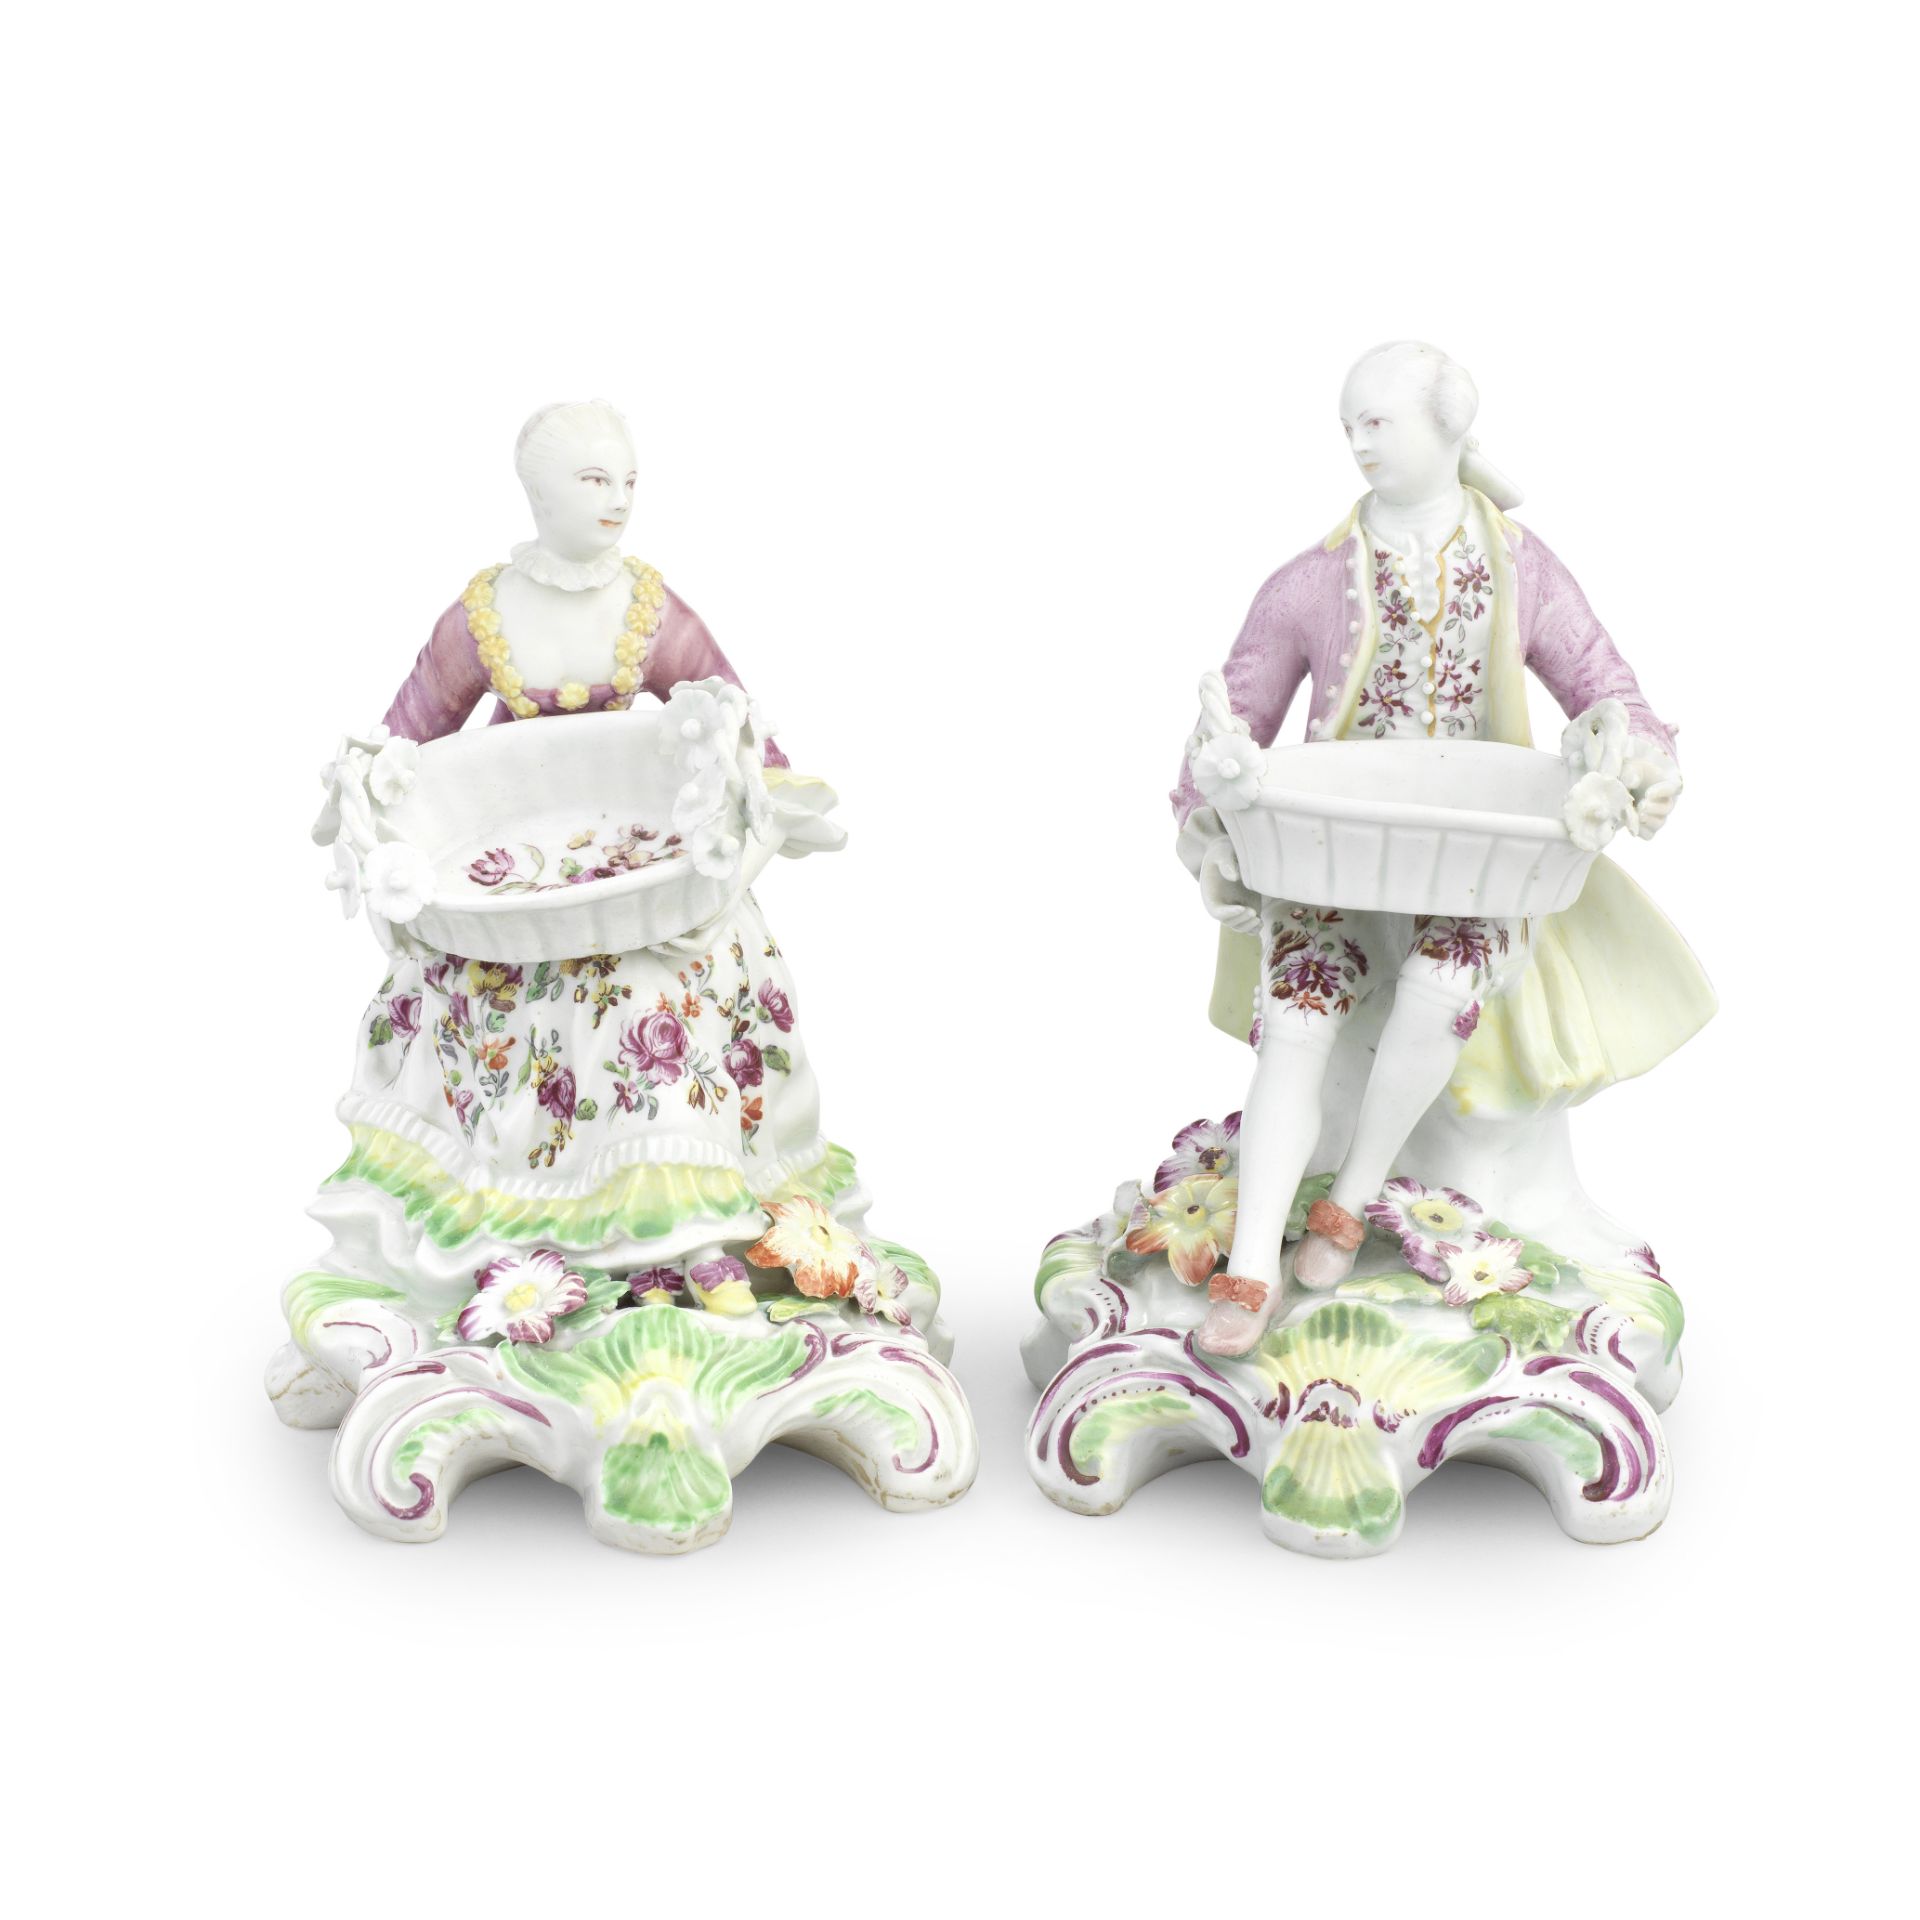 A near pair of Derby 'Pale Family' sweetmeat figures, circa 1756-58